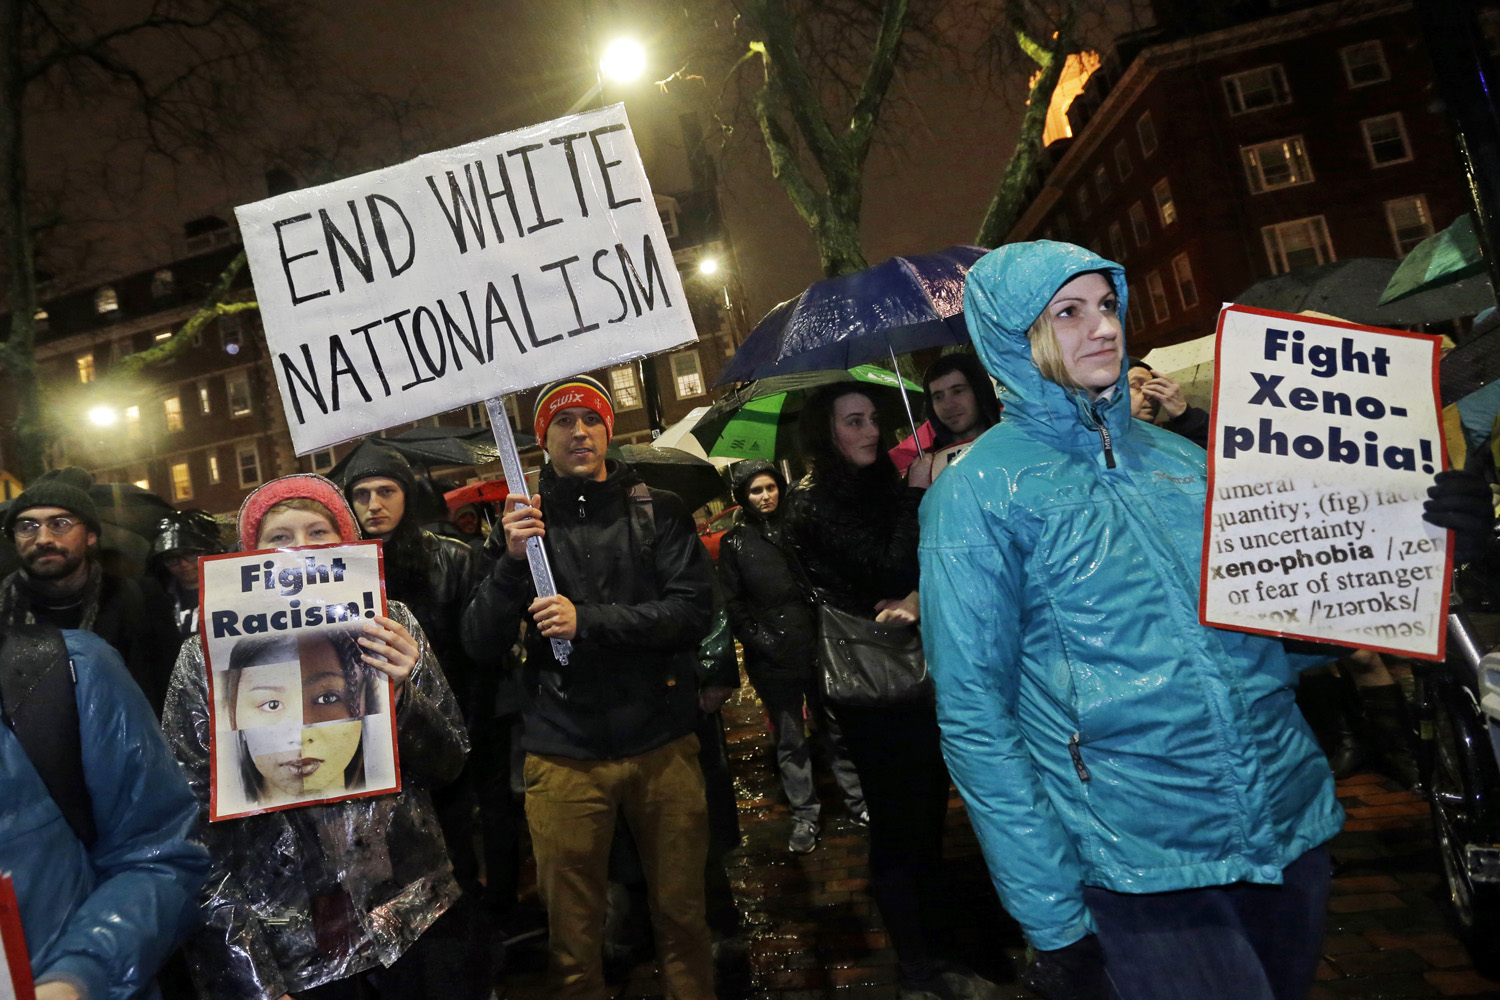 Protesters hold signs outside Harvard's John F. Kennedy School of Government, Wednesday, Nov. 30, 2016, in Cambridge, Mass. (Elise Amendola/AP